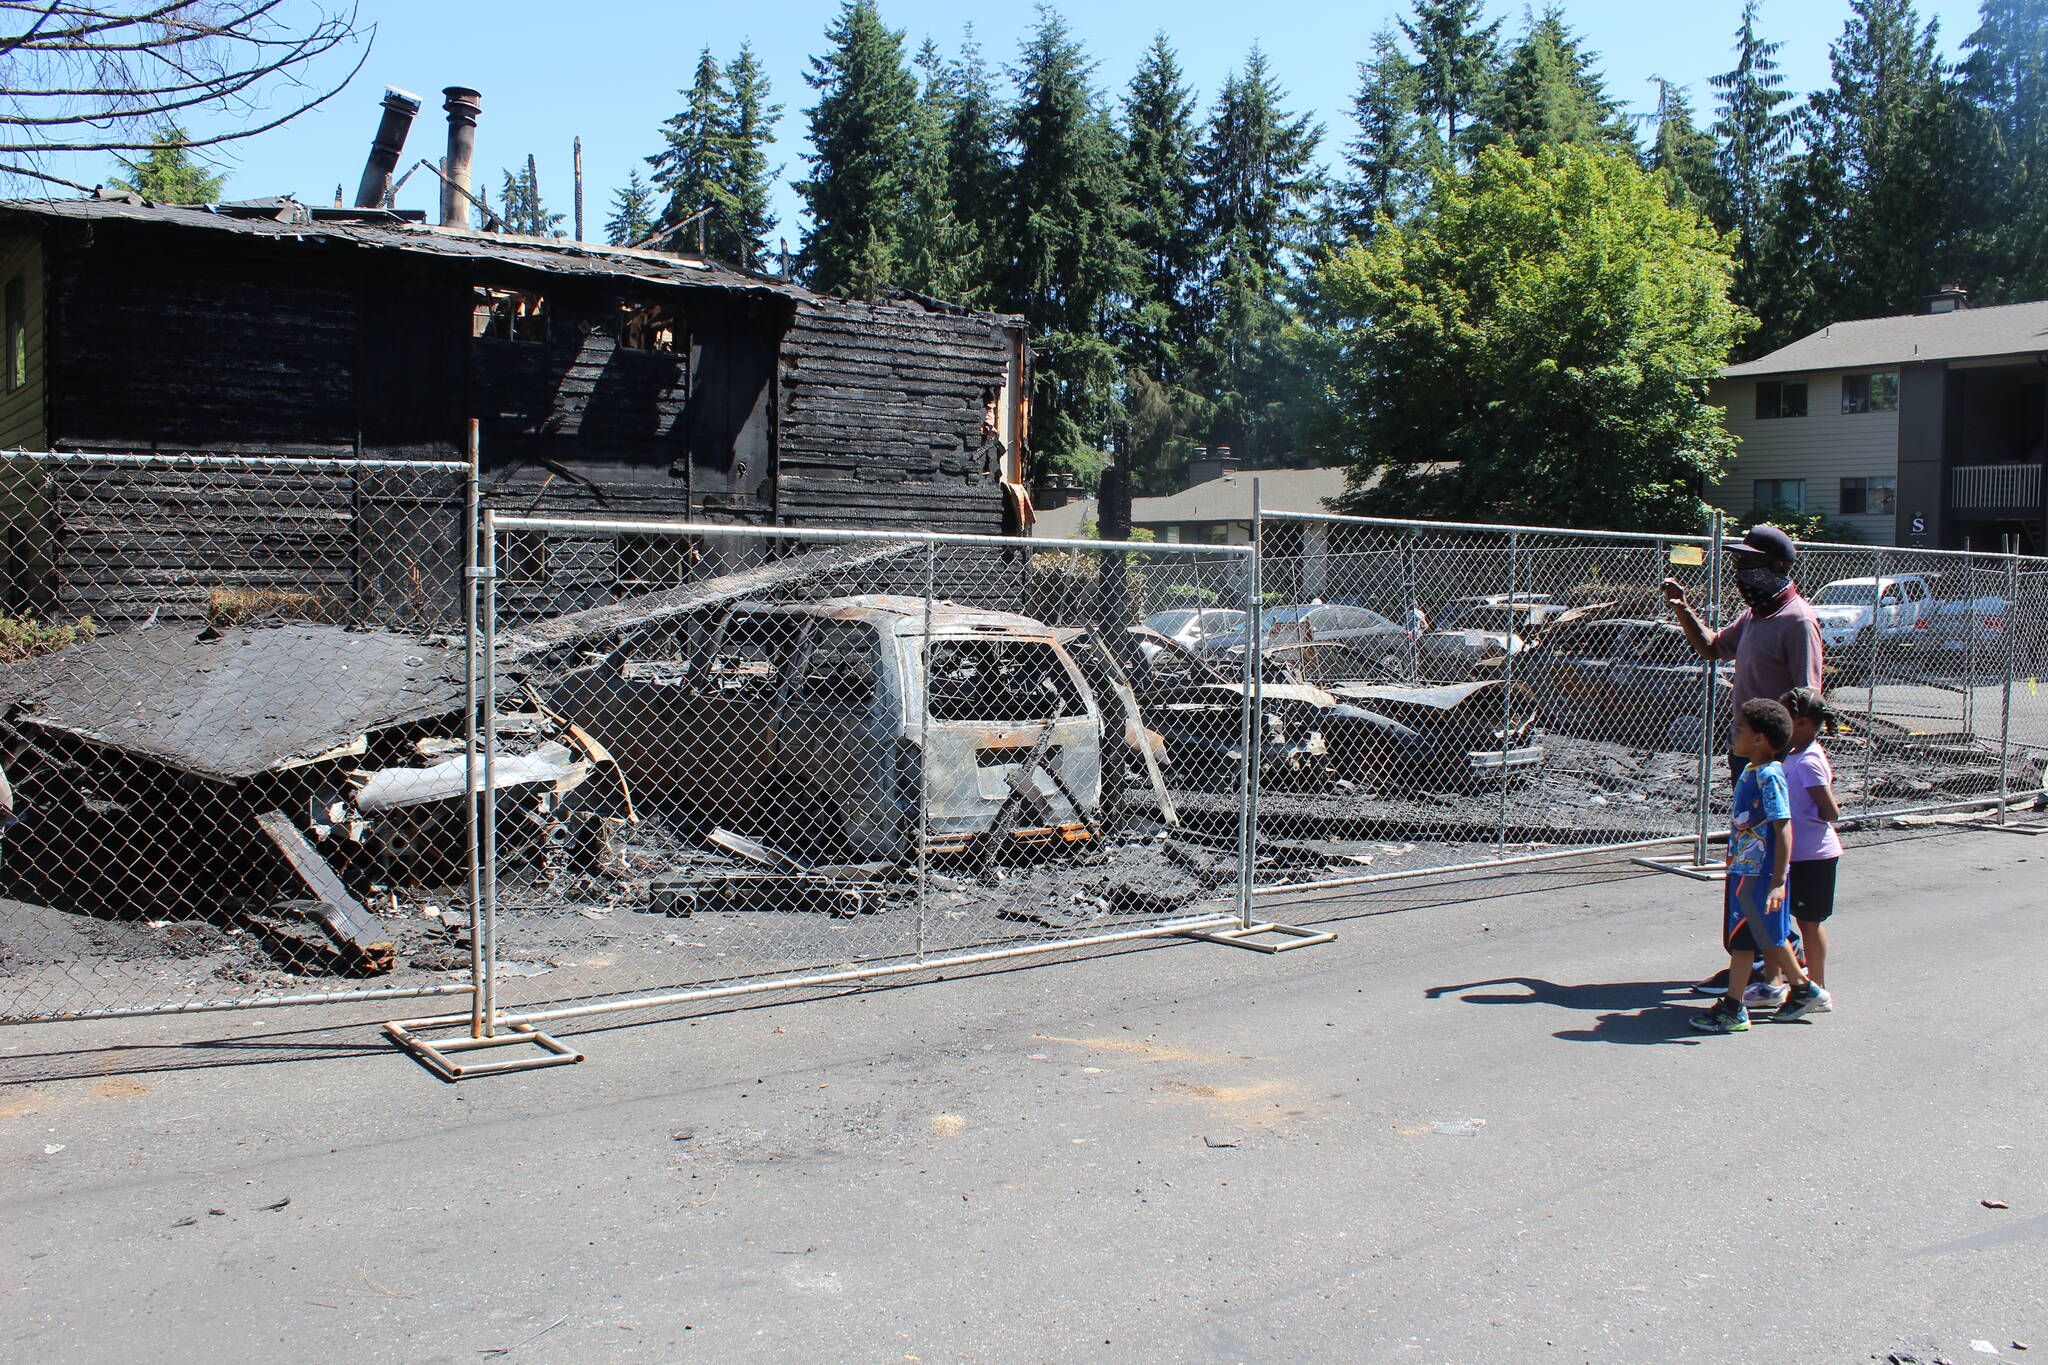 Shepherd Edwards, a resident of Cascadia apartments, stands with family members opposite of where the fire originated. "I feel bad about it," Edwards said. "A lot of people are out of a home." Edwards and his family's apartment is in another building in the complex. Photo by Bailey Jo Josie/Sound Publishing.